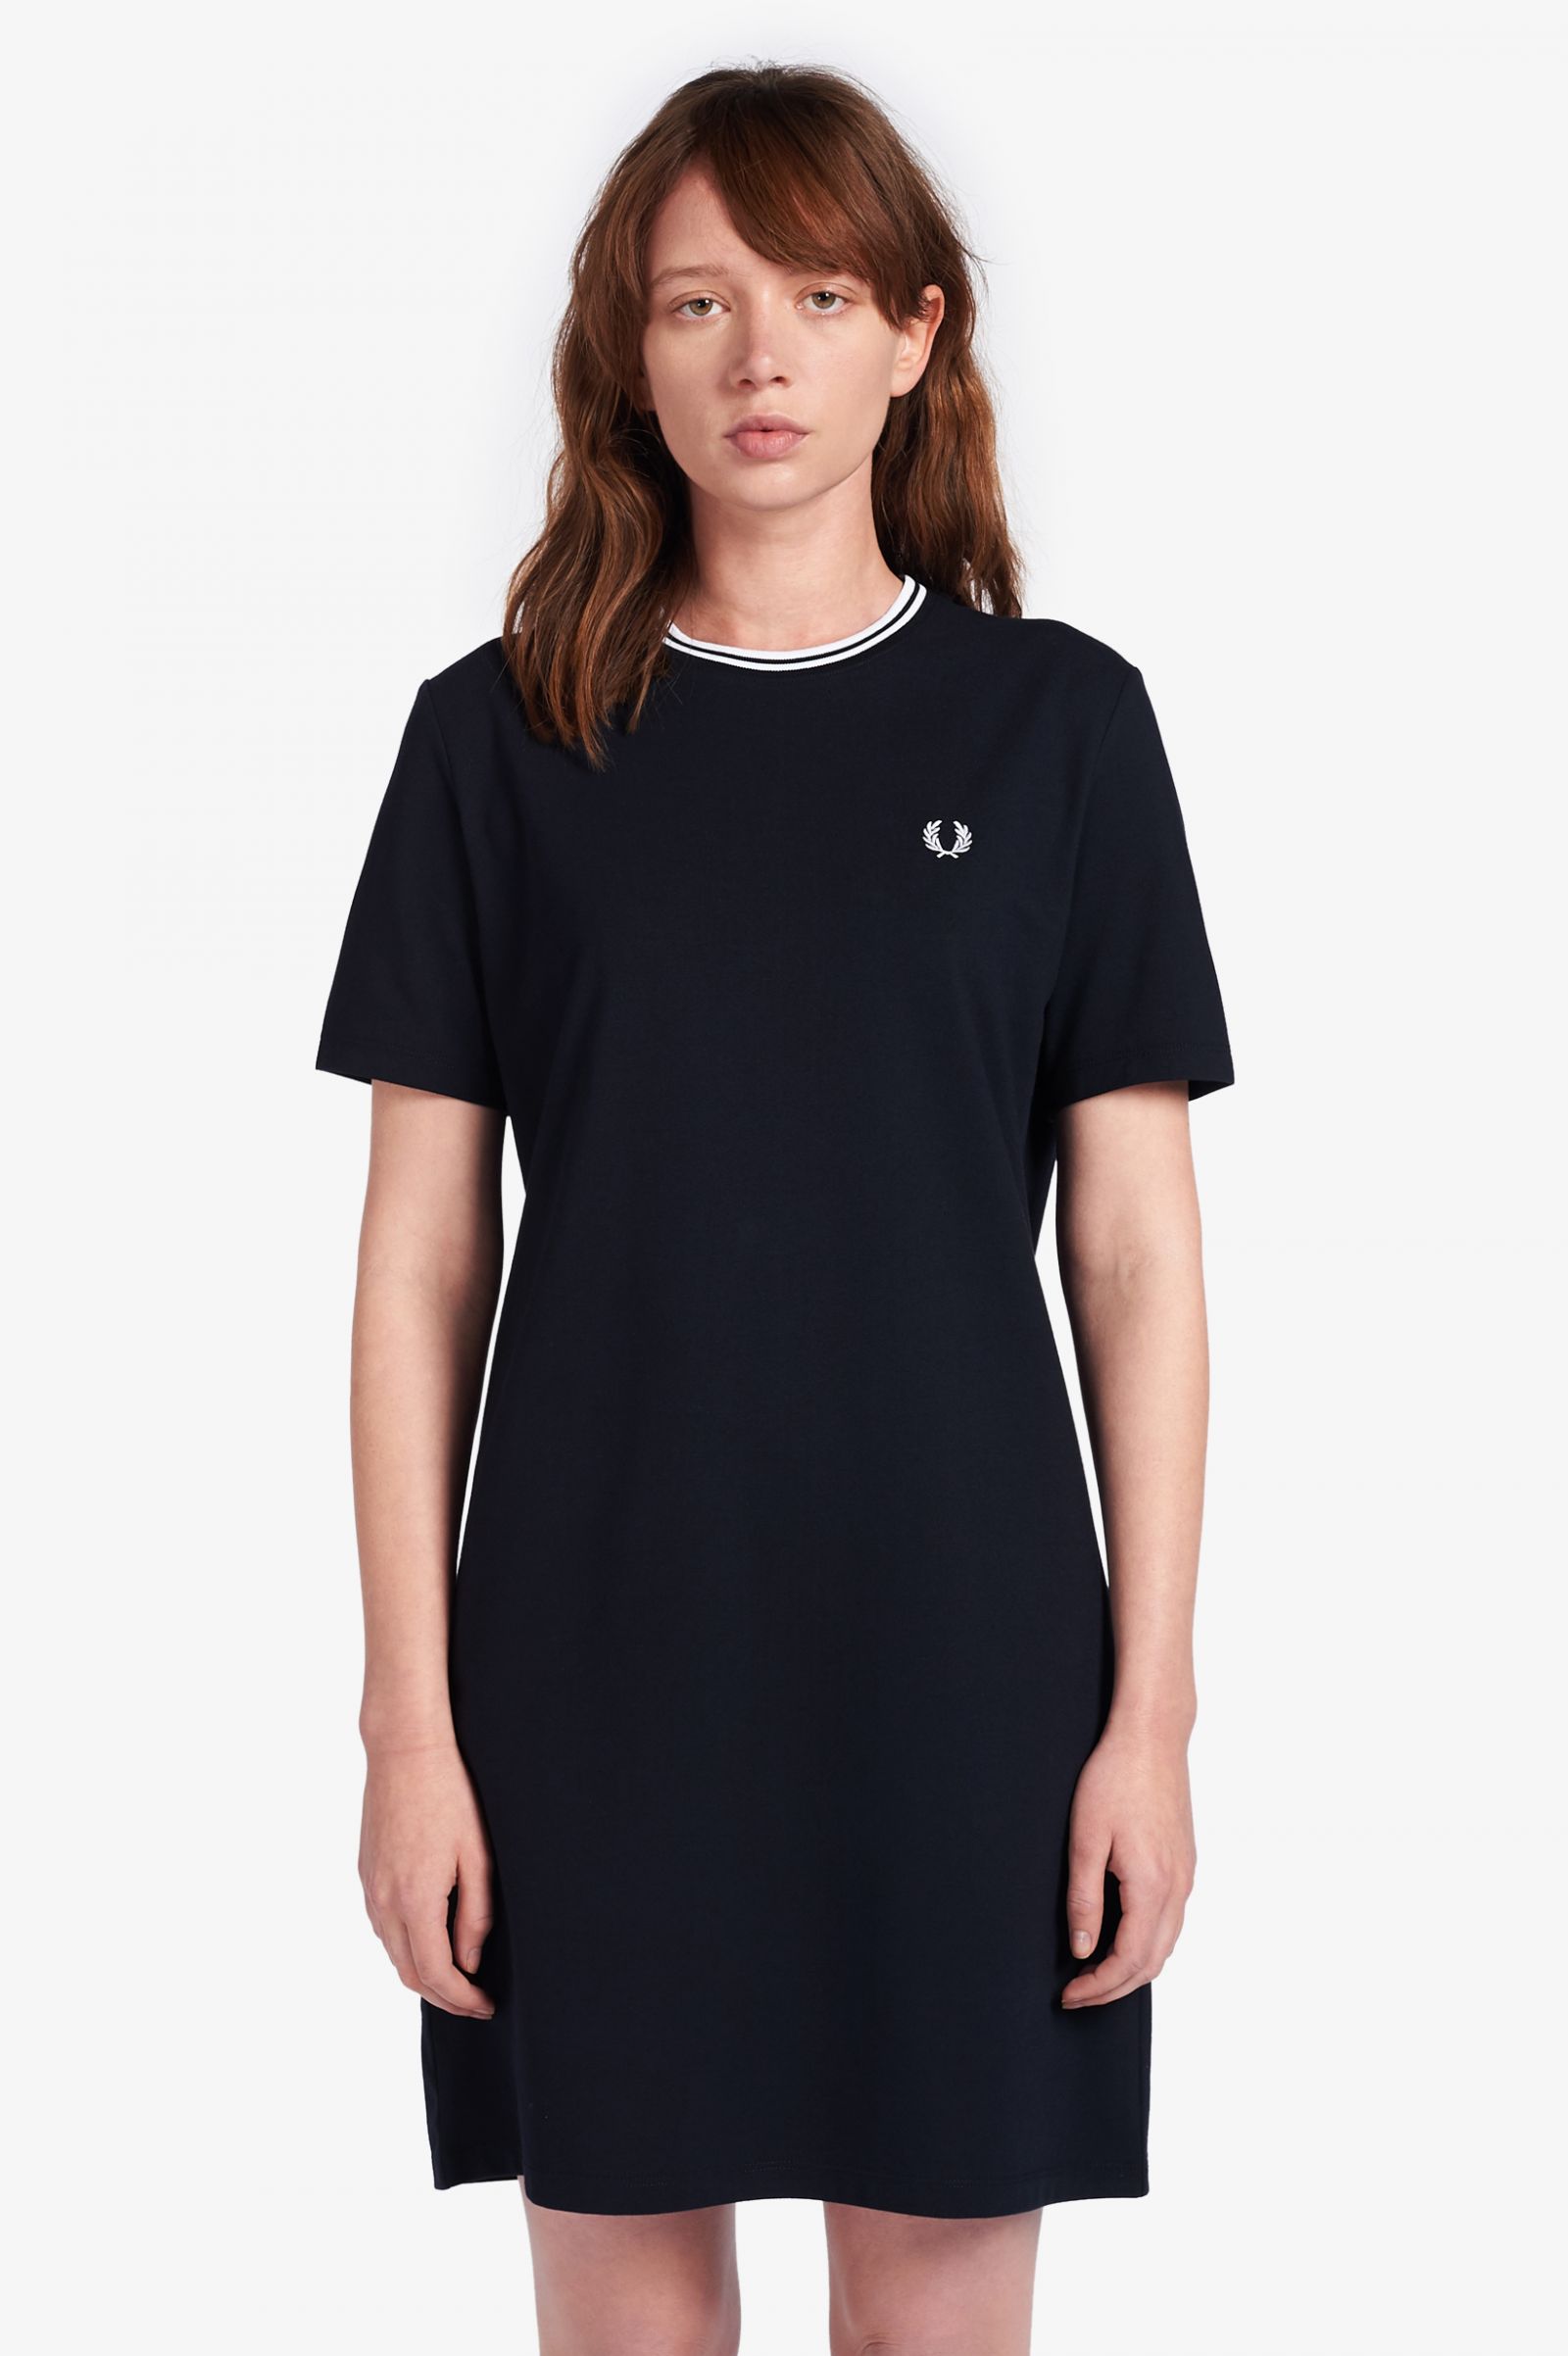 Girls Fred Perry Dress Factory Sale, 52 ...